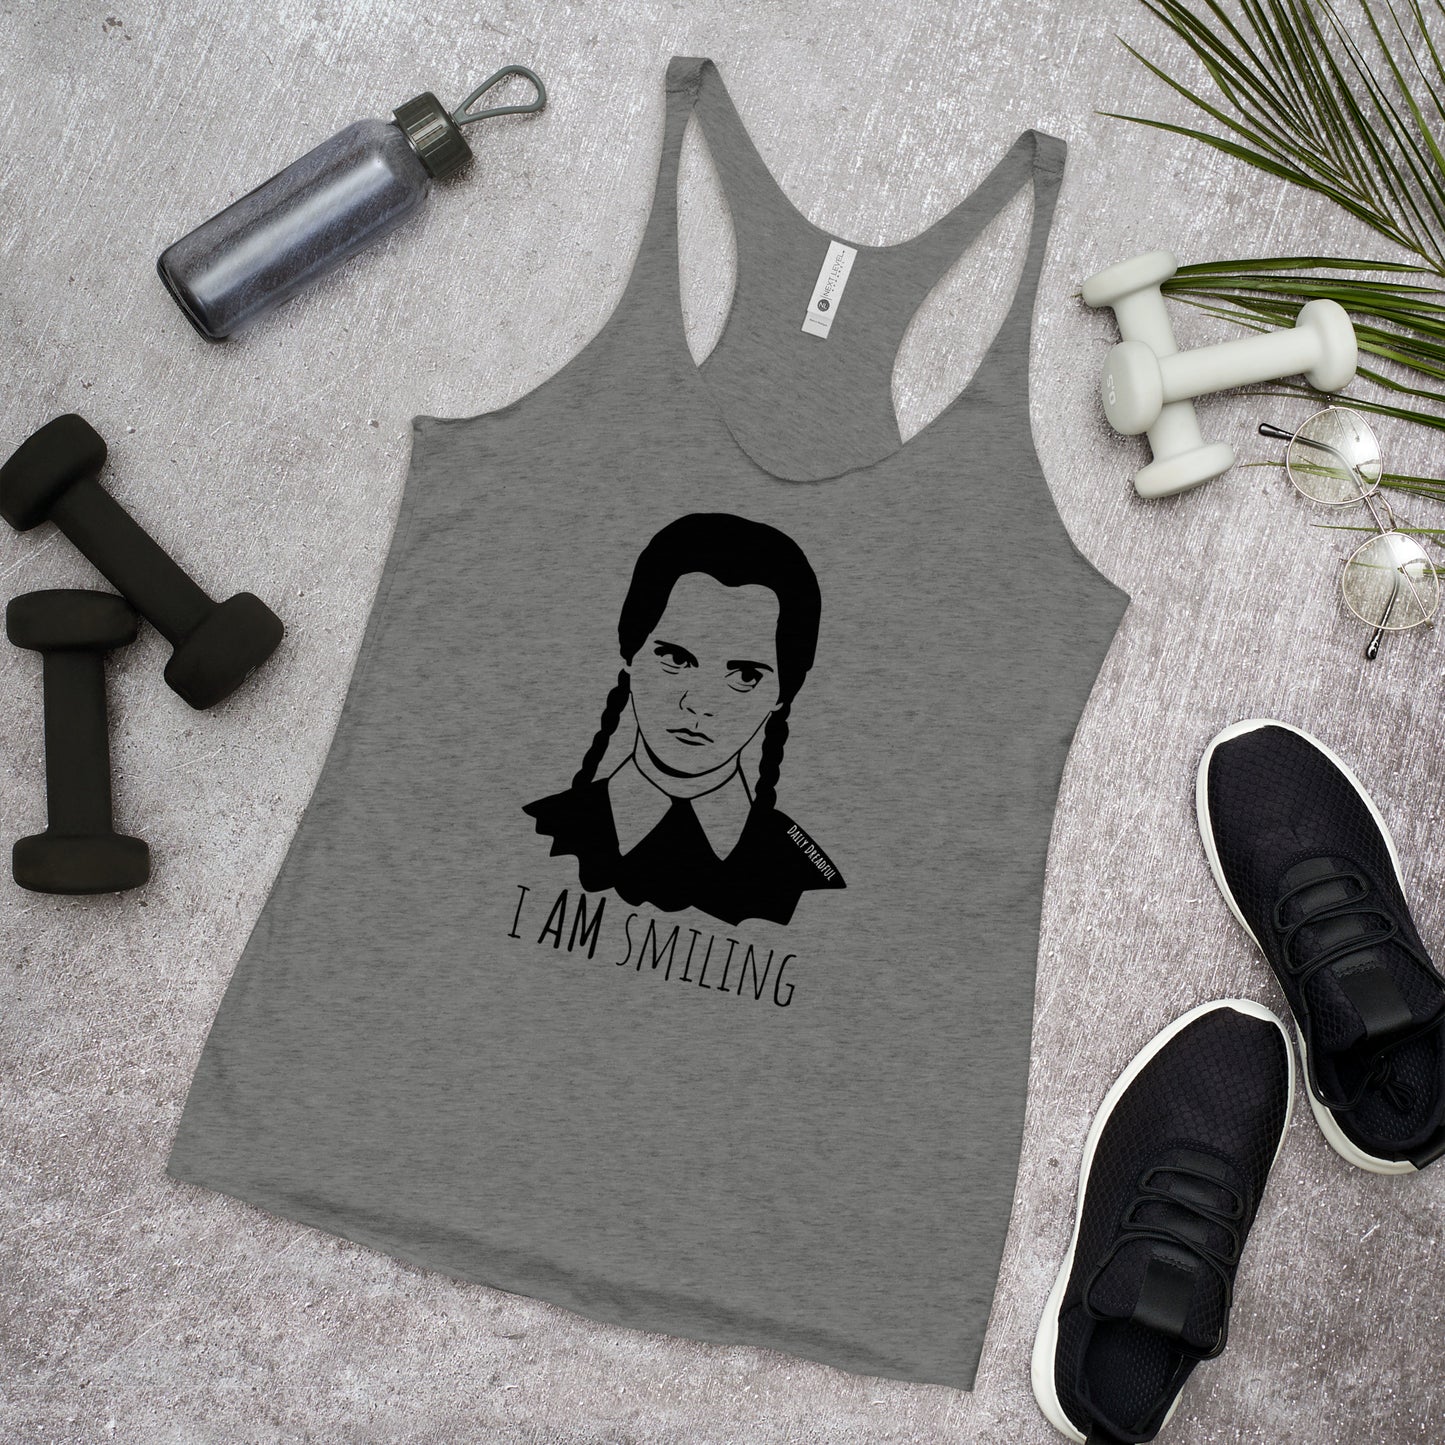 premium heather "I Am Smiling" Wednesday Addams Racerback Tank Top from Daily Dreadful